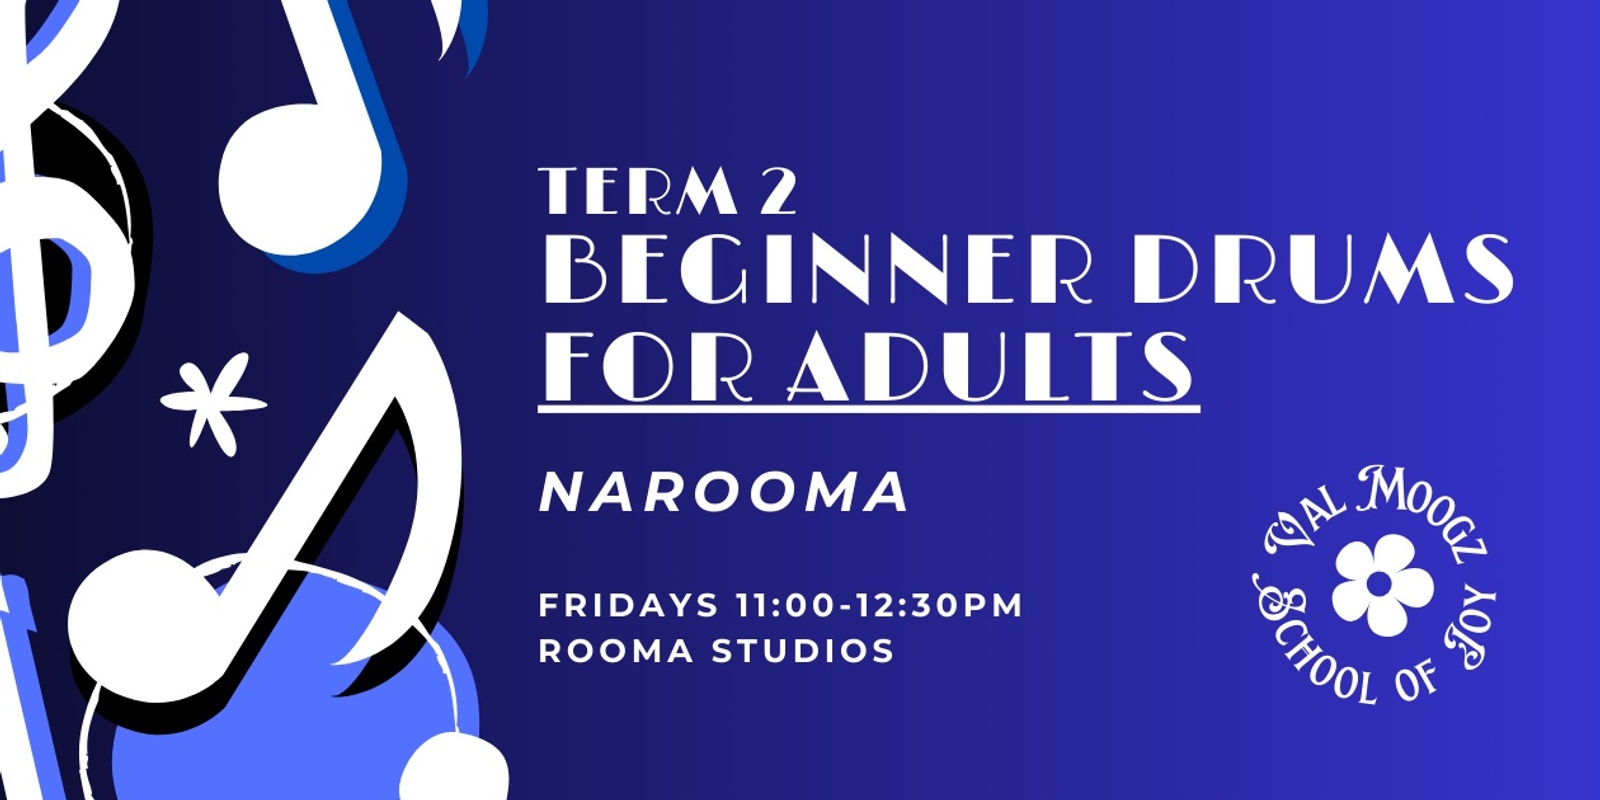 Banner image for Term 2 - Beginner Drums for Adults - Narooma